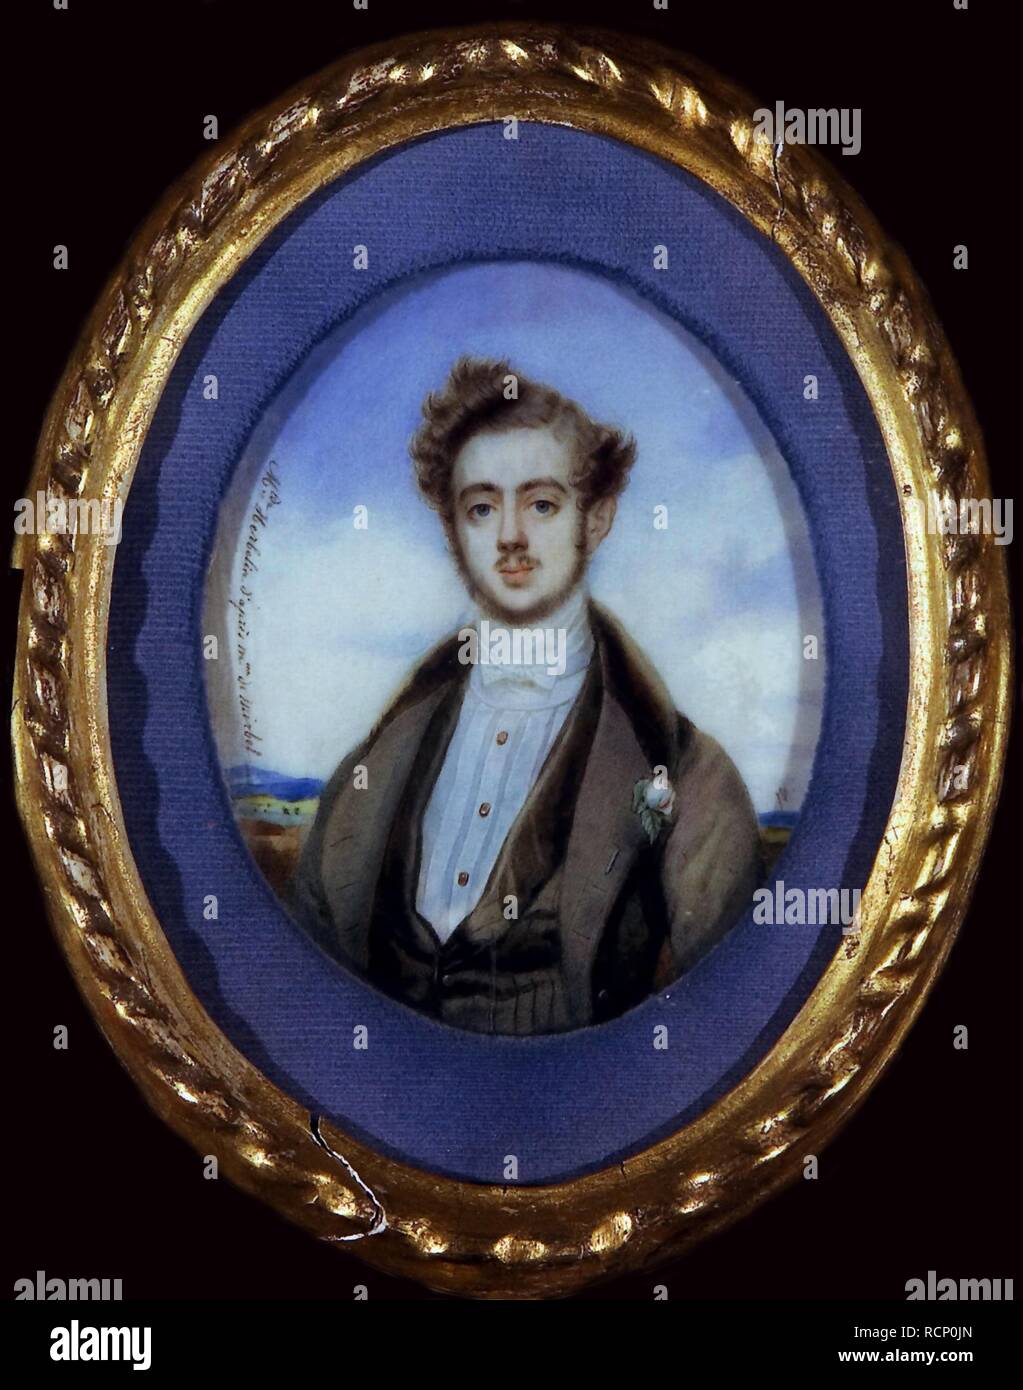 Portrait of Count Anatole Nikolaievich Demidov, 1st Prince of San Donato (1812-1870). Museum: PRIVATE COLLECTION. Author: Herbelin, Jeanne-Mathilde. Stock Photo